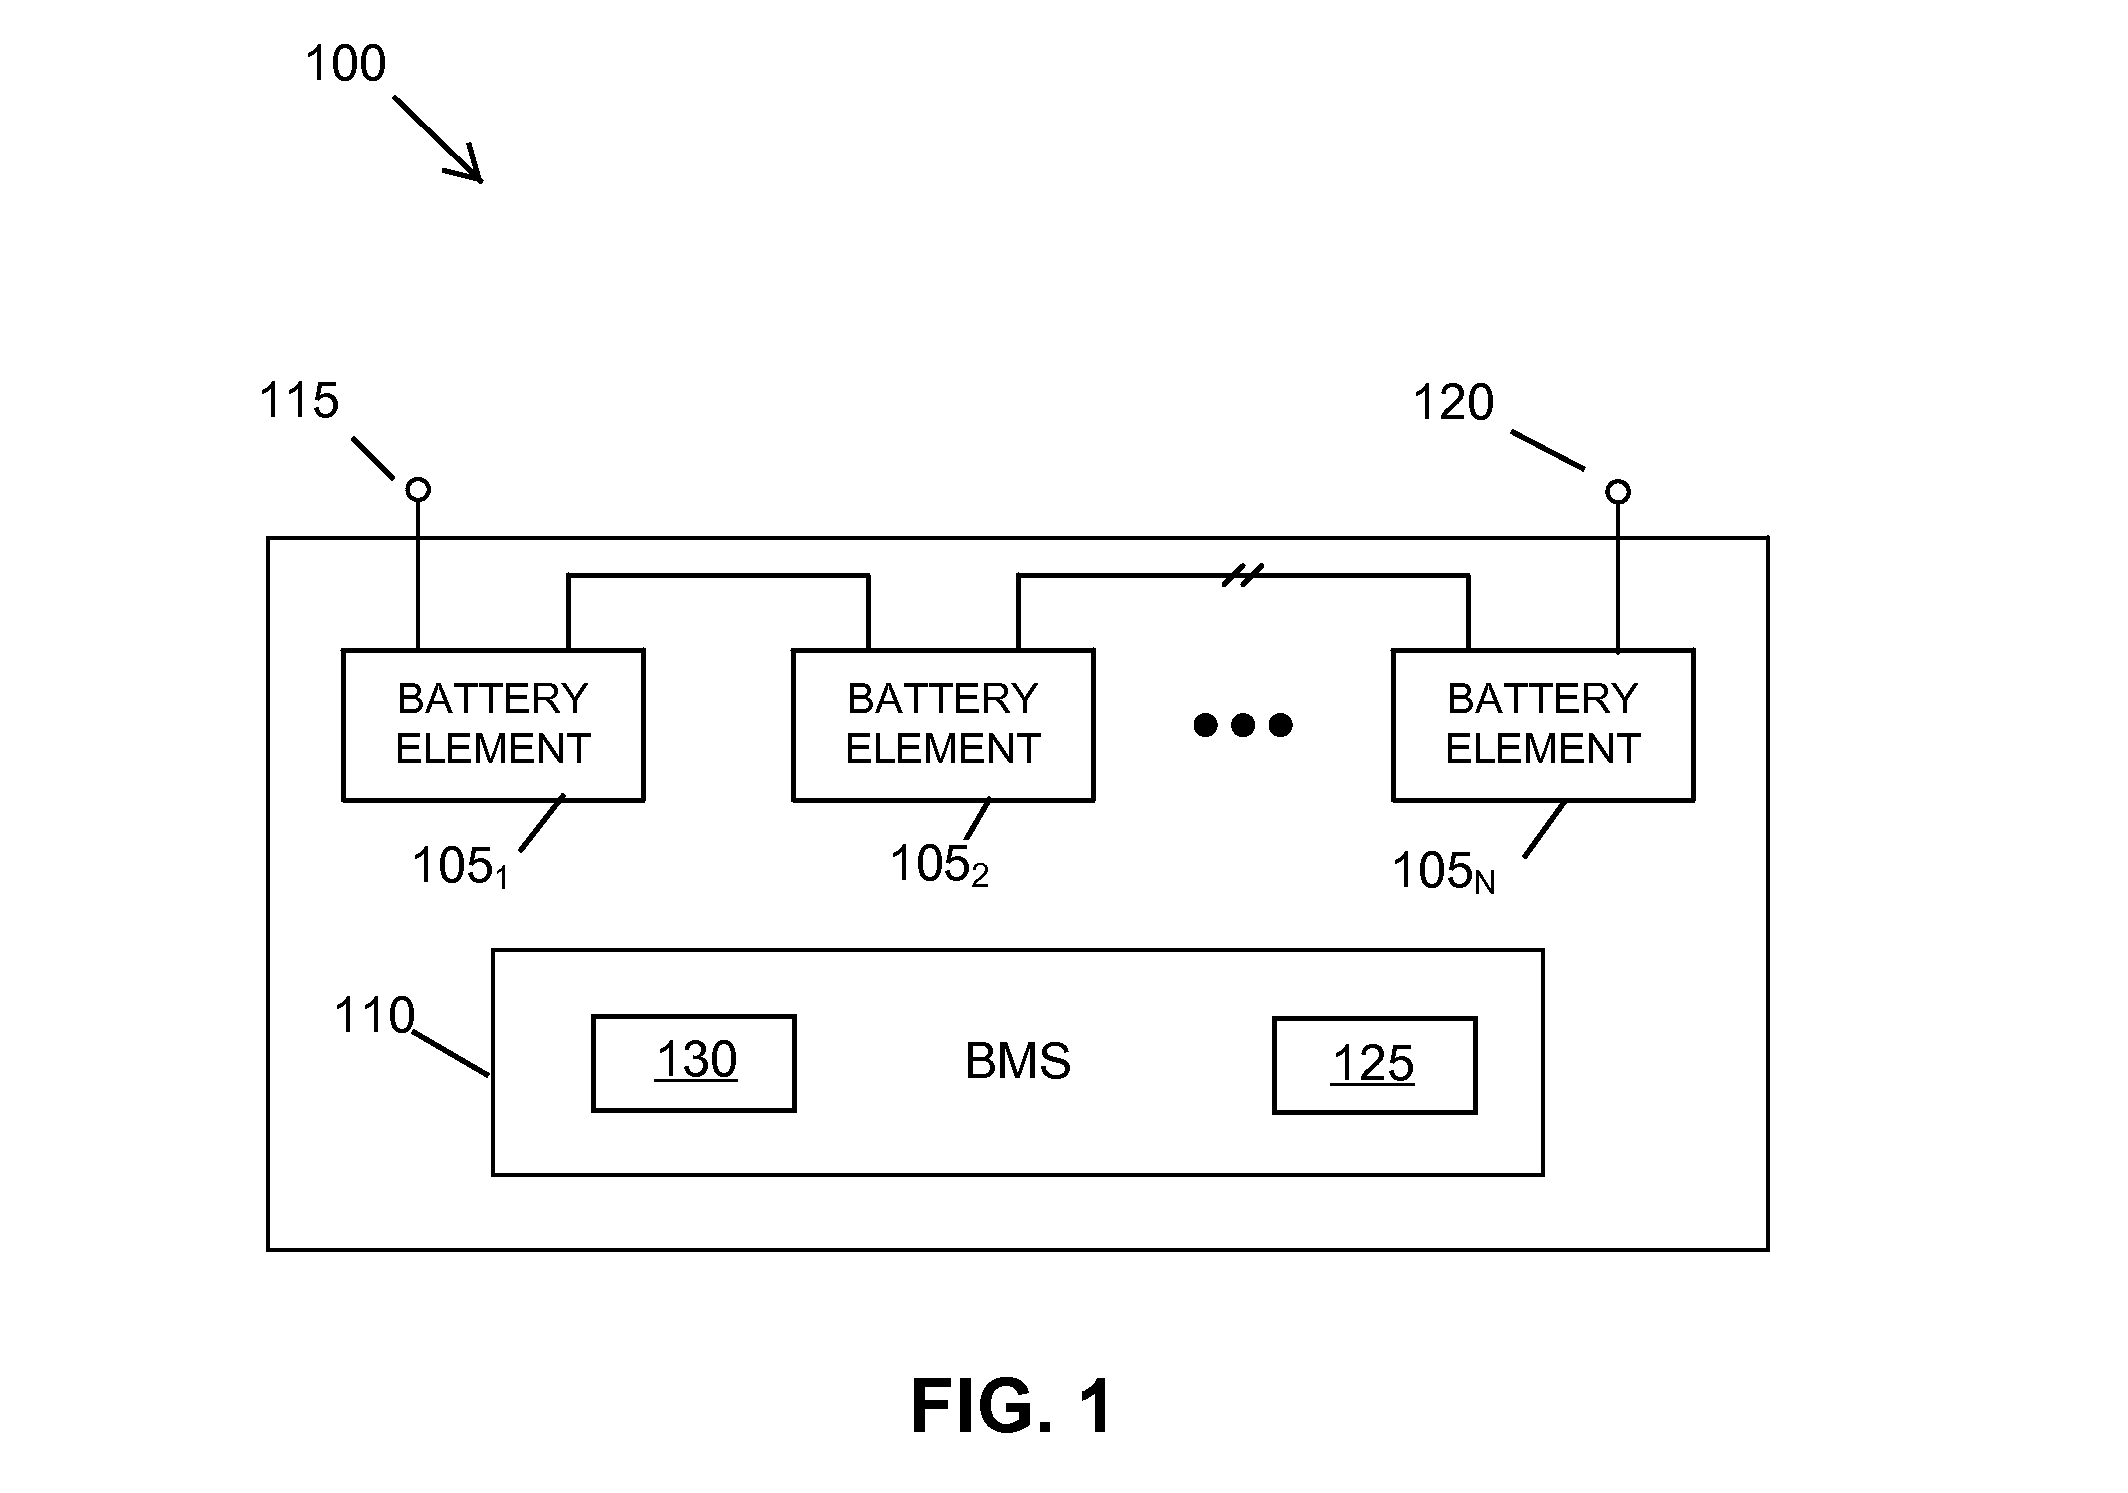 Steady state detection of an exceptional charge event in a series connected battery element